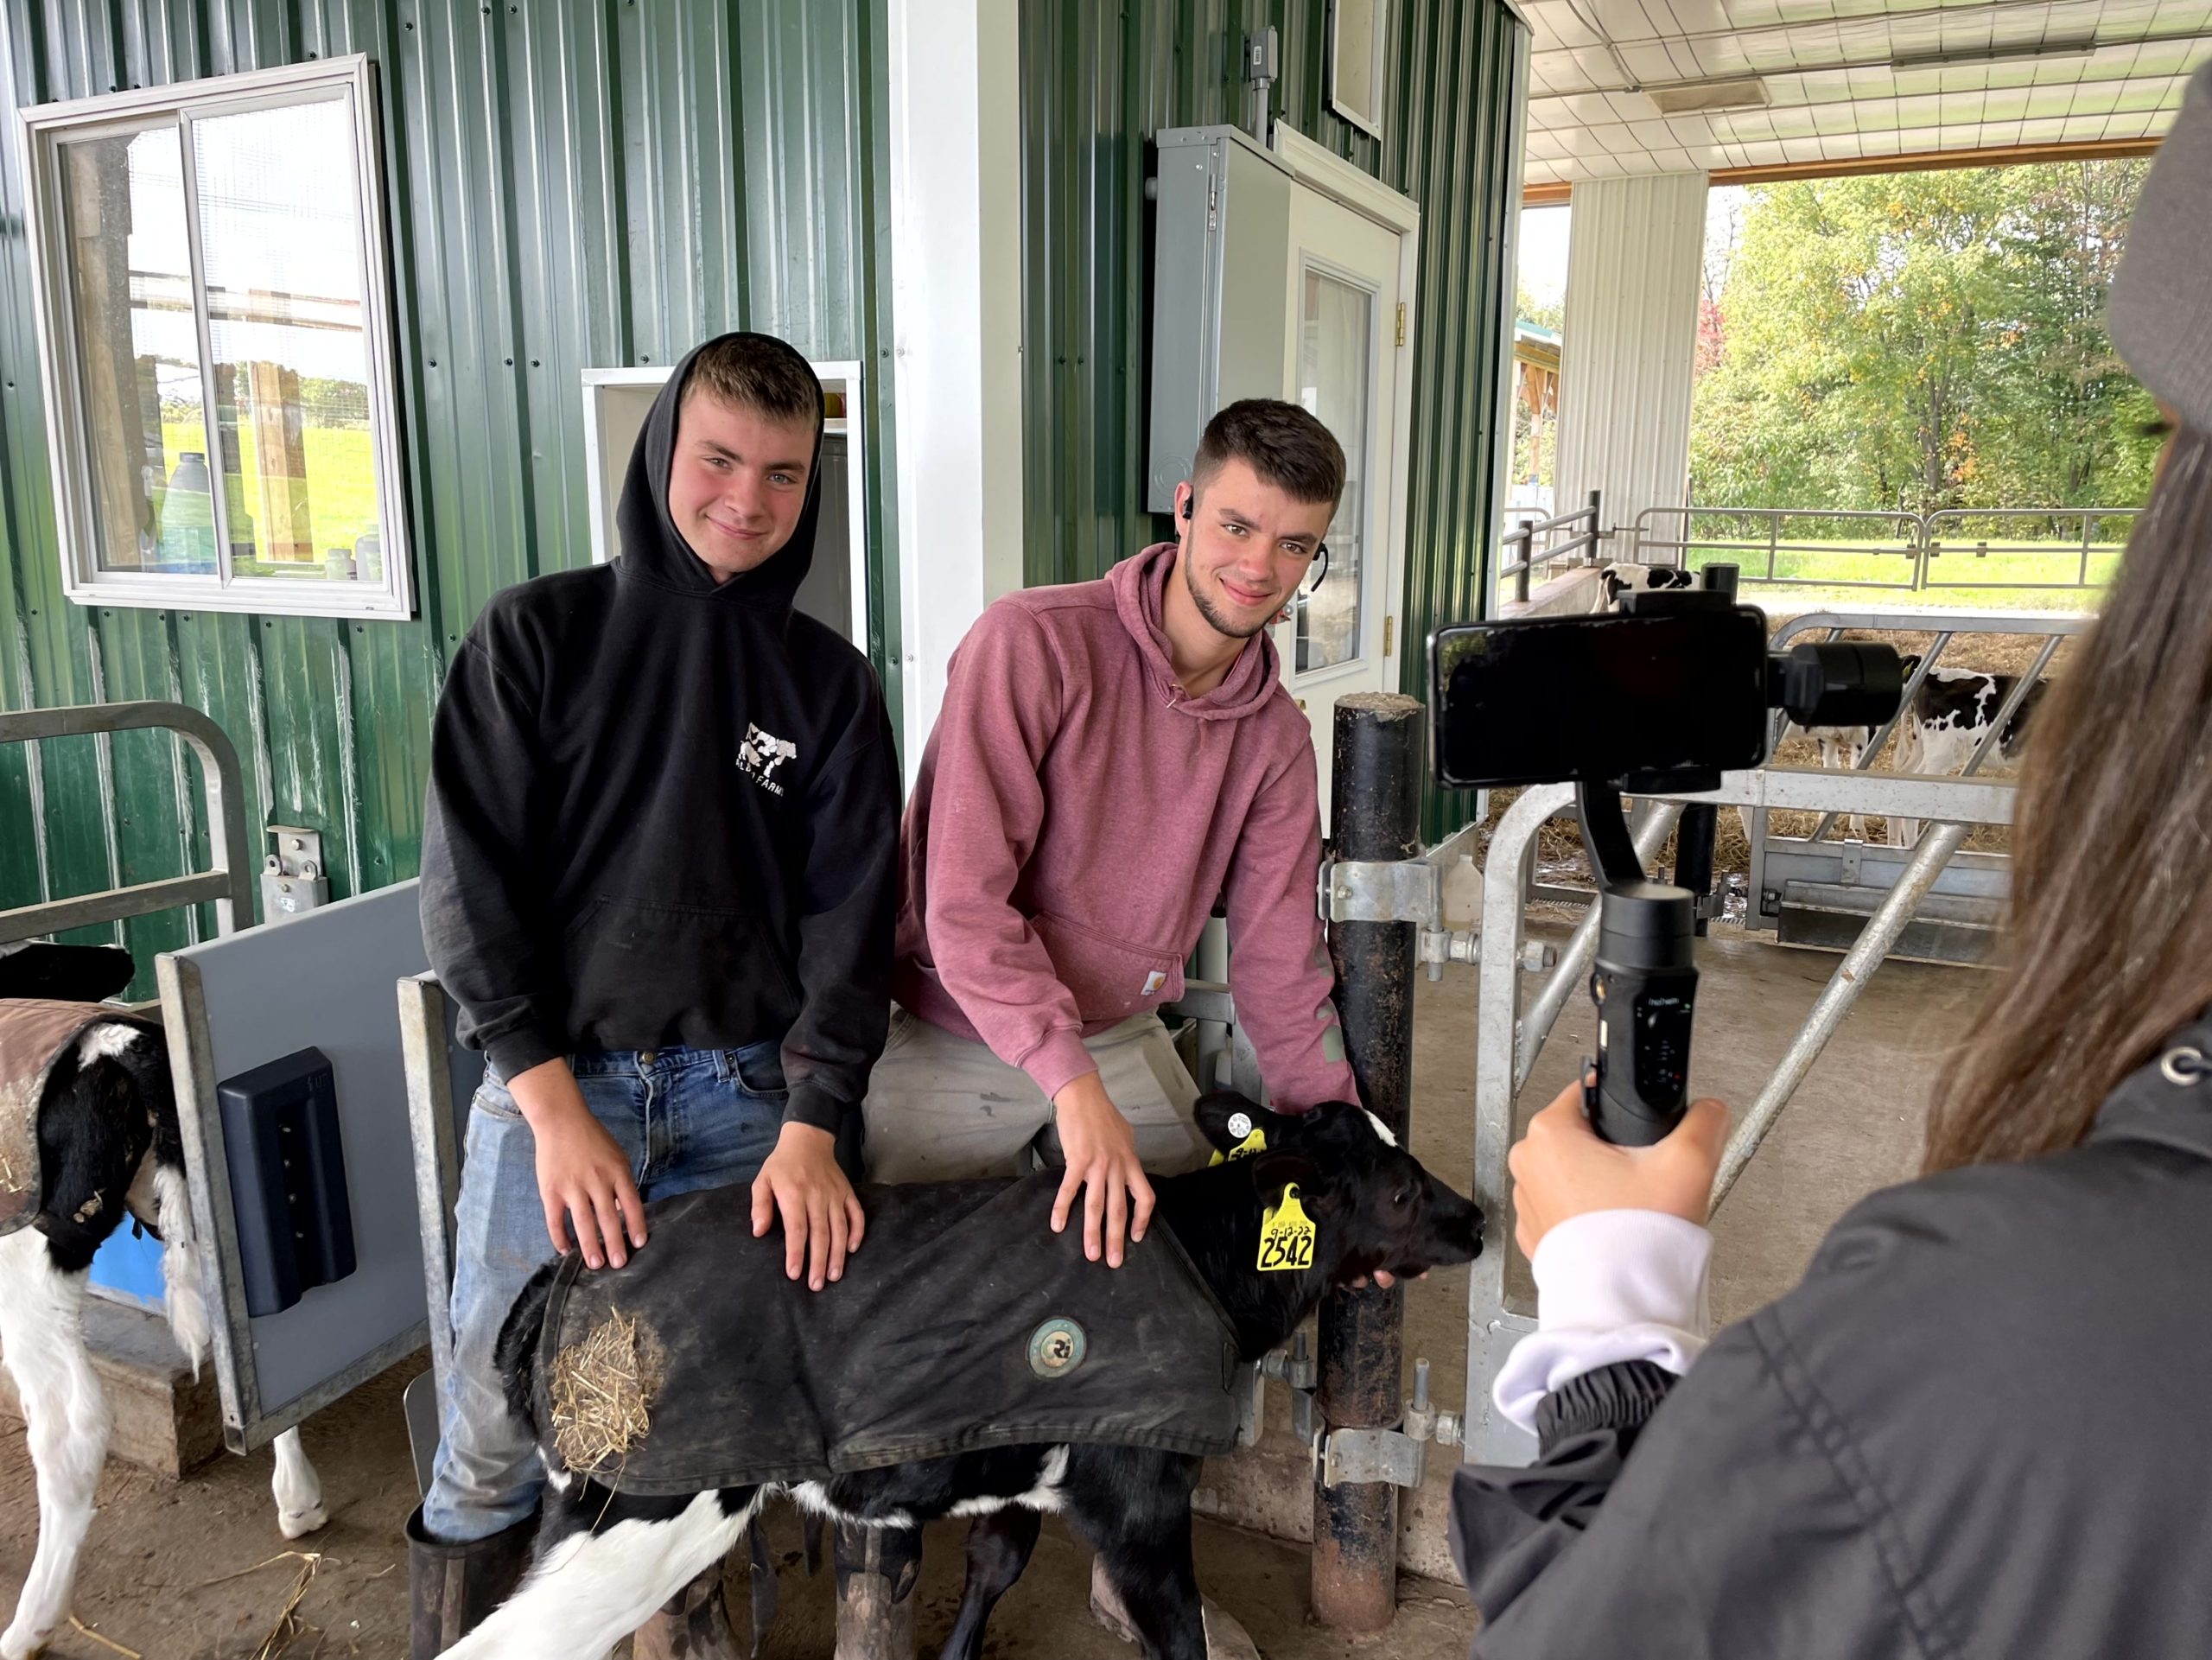 Virtual Farm Tour Draws 17,000+ Students to Learn About Dairy